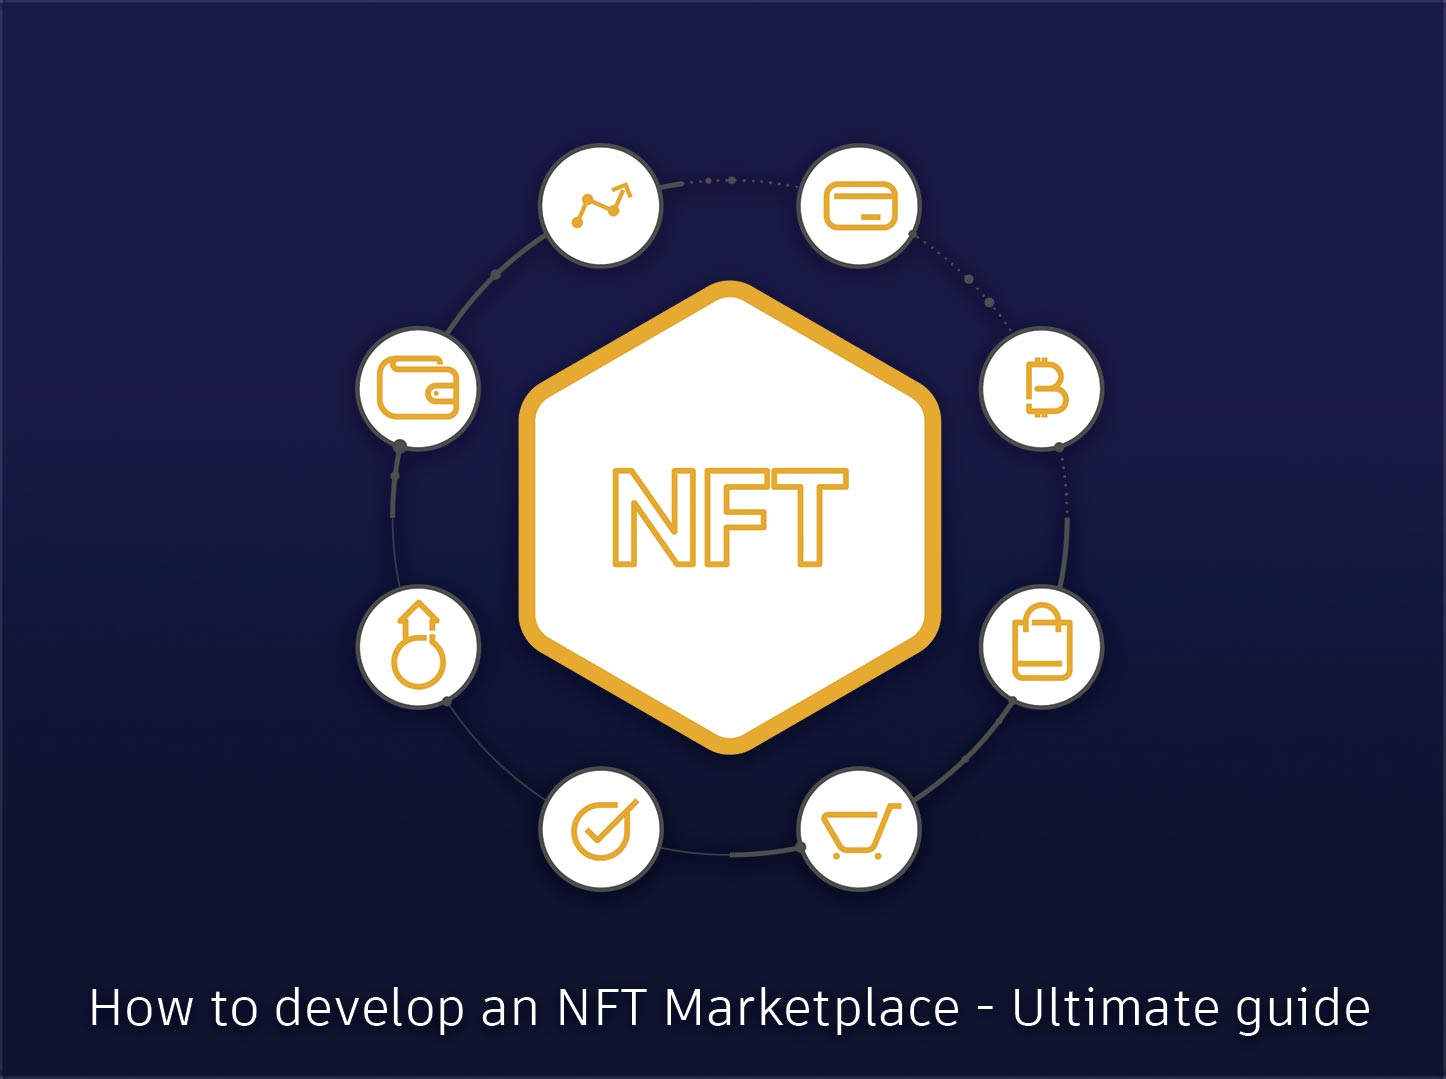 In recent years, the NFT market has grown in popularity. It helps artists, creators, and other non-fungible goods creators in determining the value of their own products. Read full blog about NFT Marketplace.